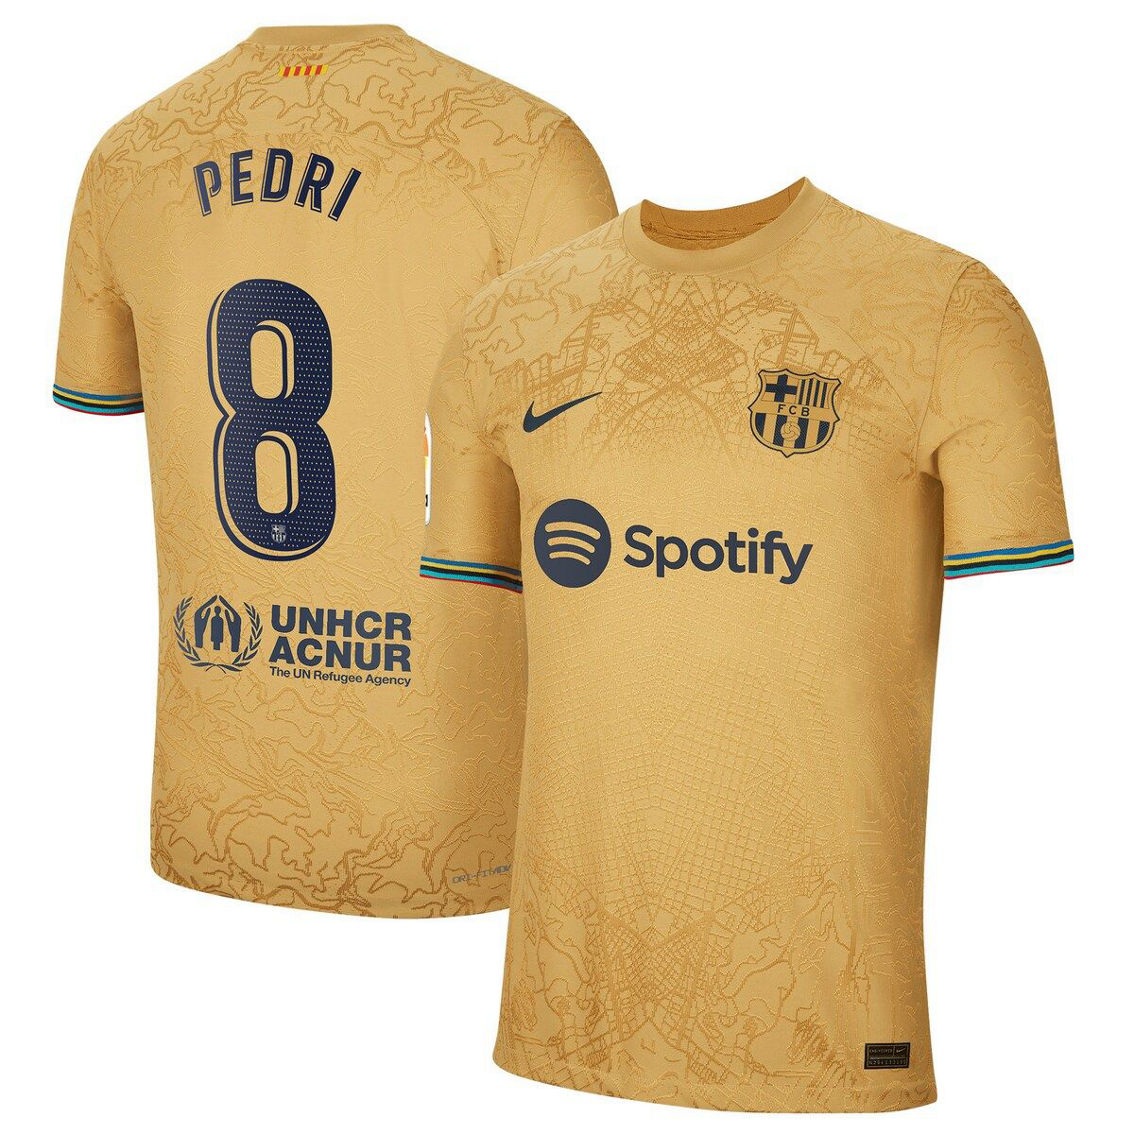 Nike Men's Pedri Gold Barcelona 2022/23 Away Authentic Player Jersey - Image 2 of 4